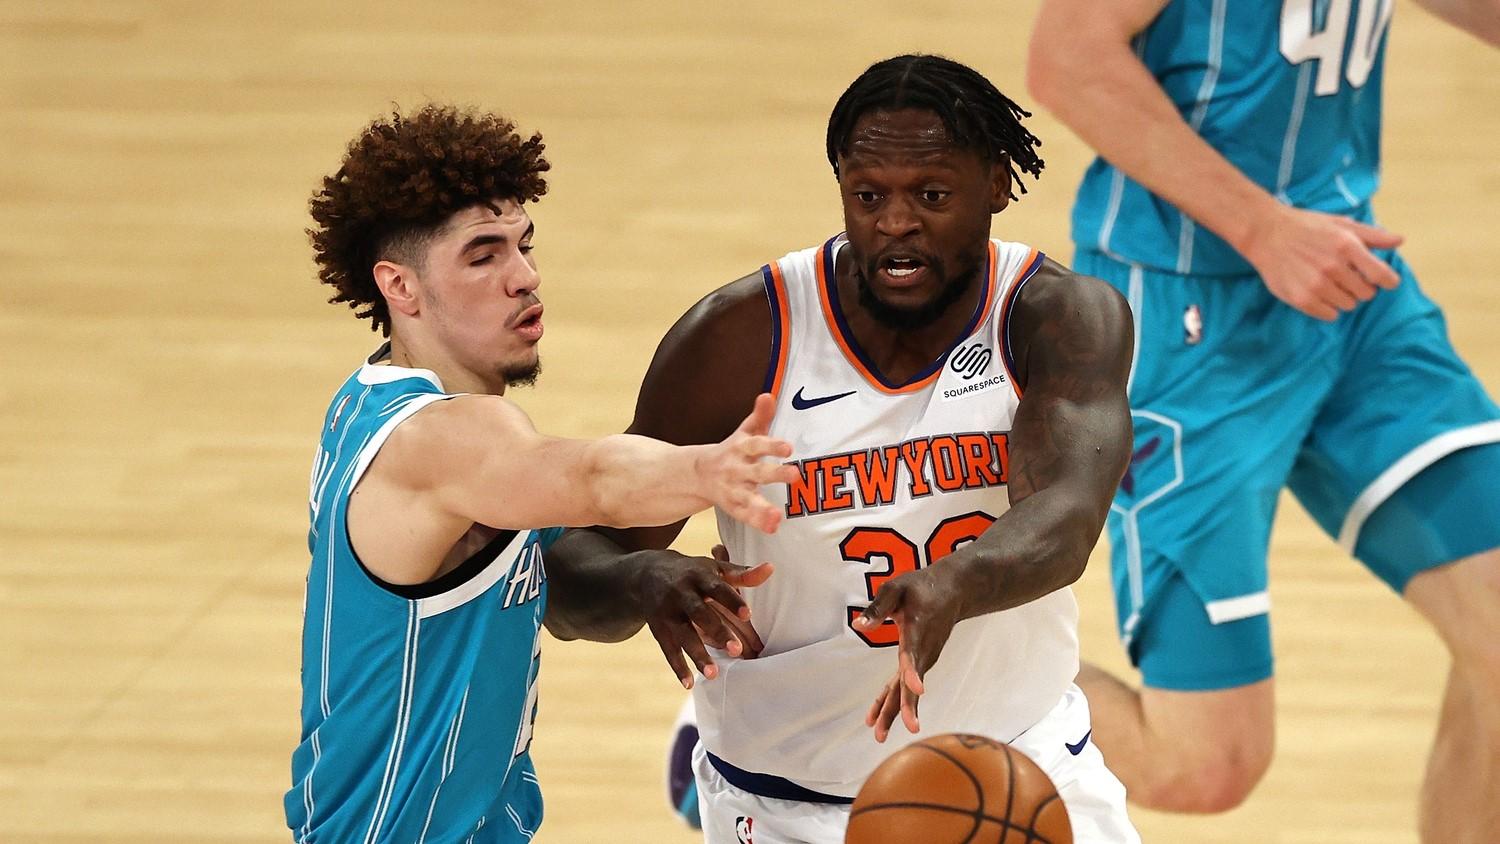 Julius Randle #30 of the New York Knicks passes under pressure from LaMelo Ball #2 of the Charlotte Hornets in the second quarter at Madison Square Garden. / Pool Photo-USA TODAY Sports